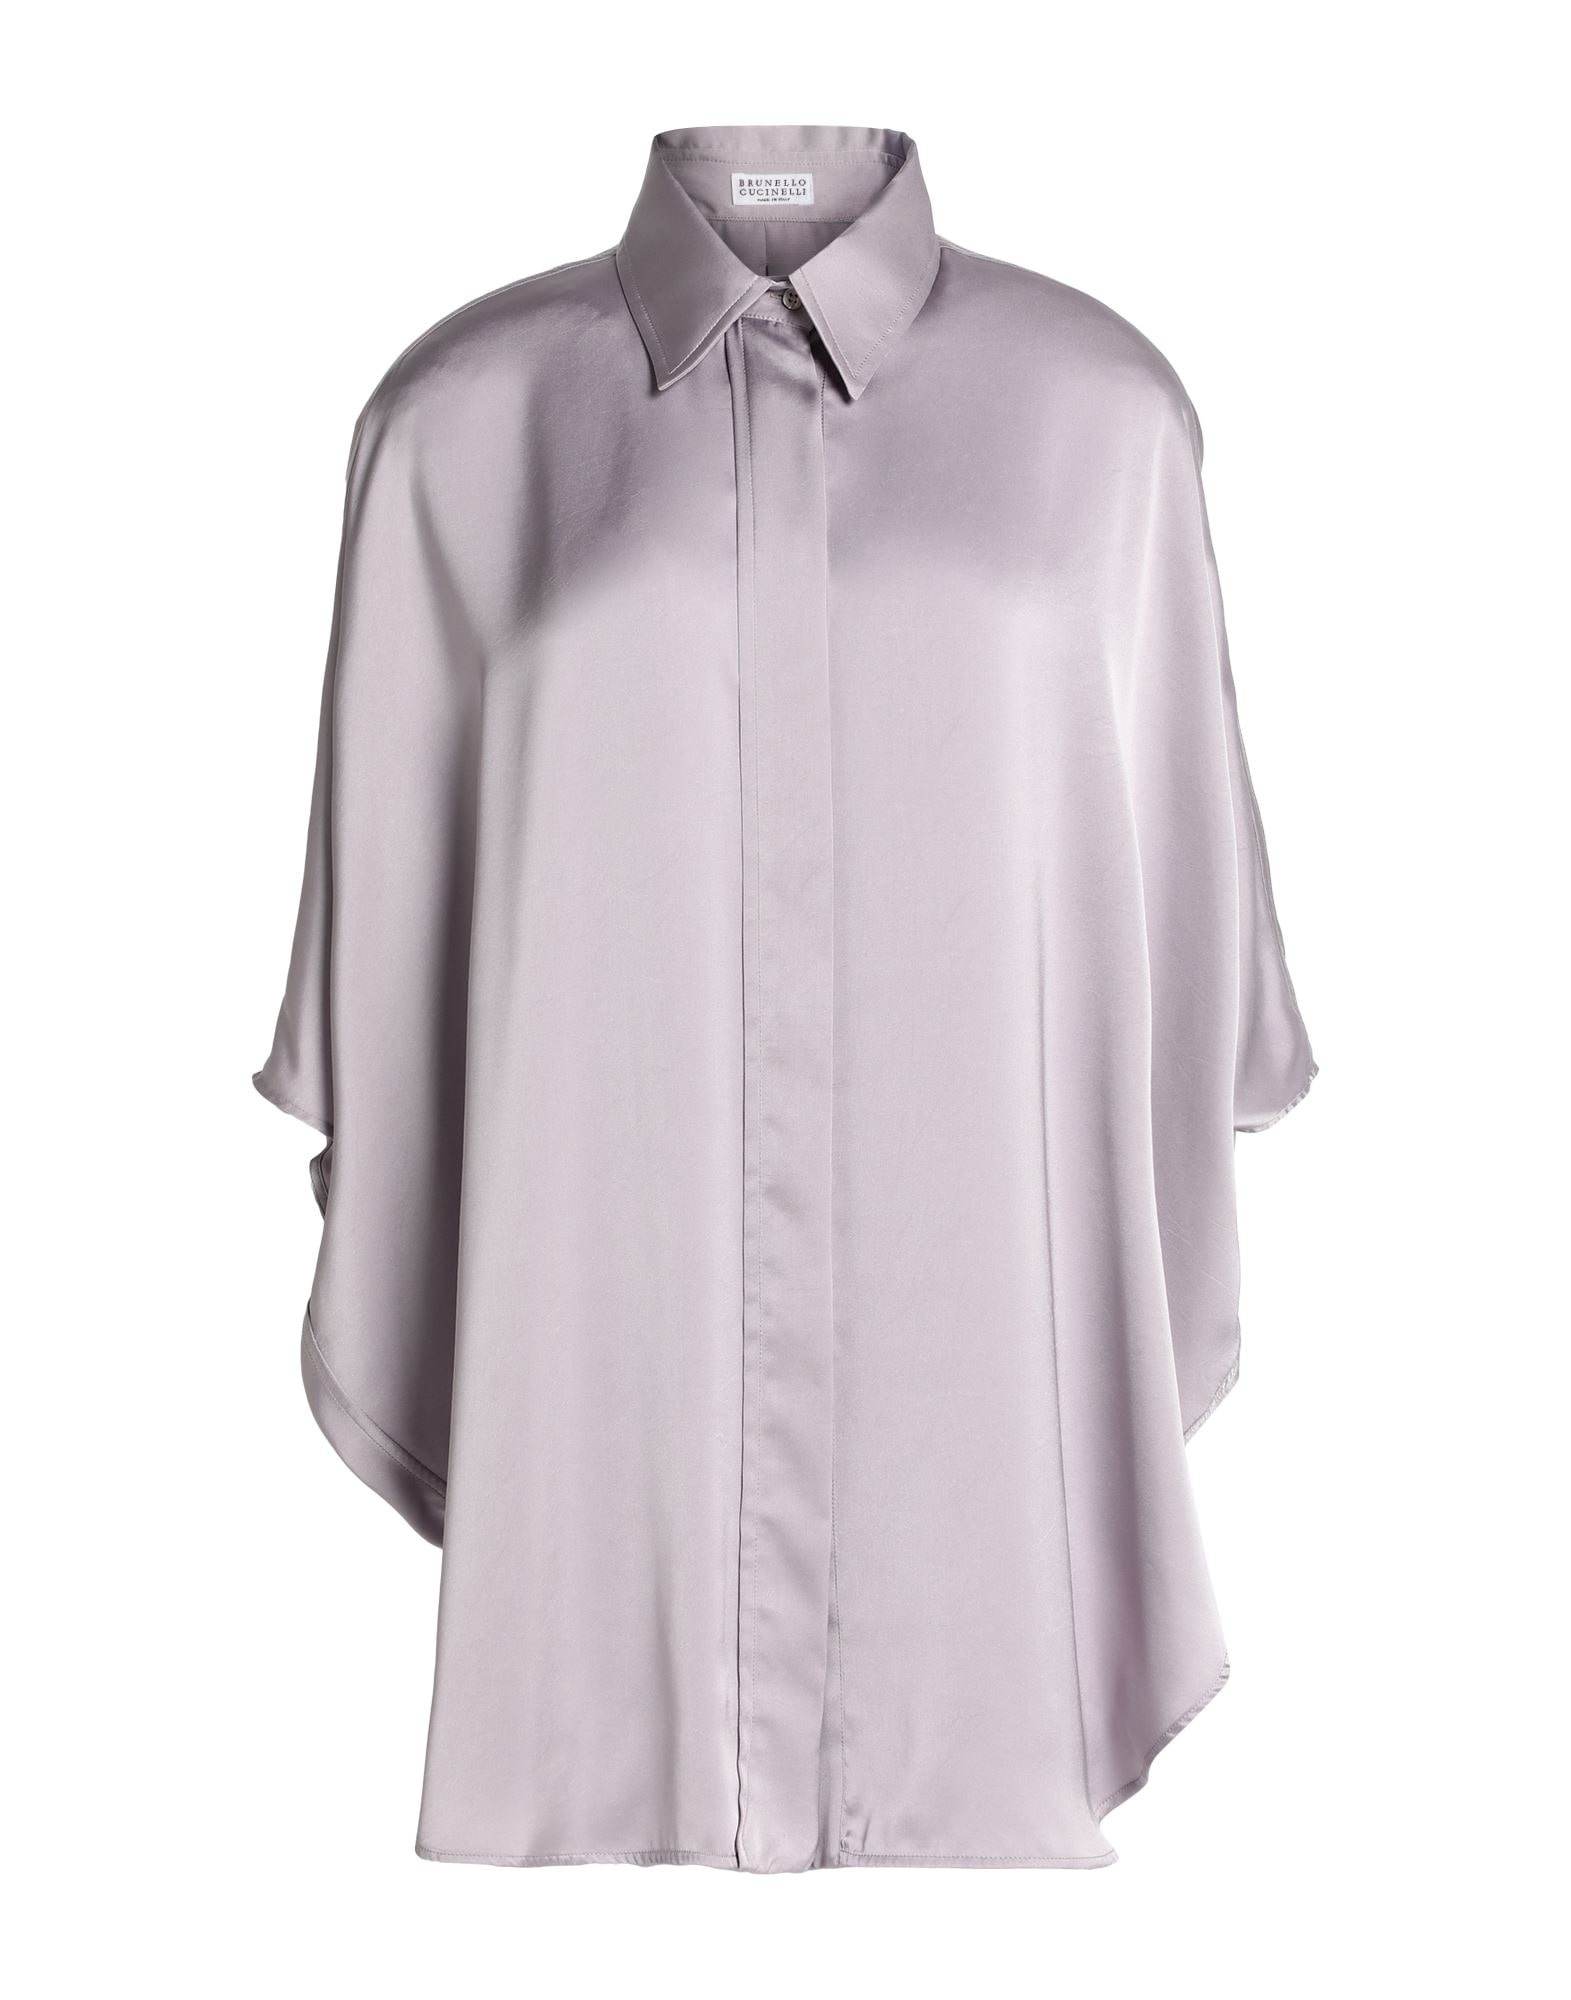 Lilac Women's Solid Color Shirts & Blouses - 1